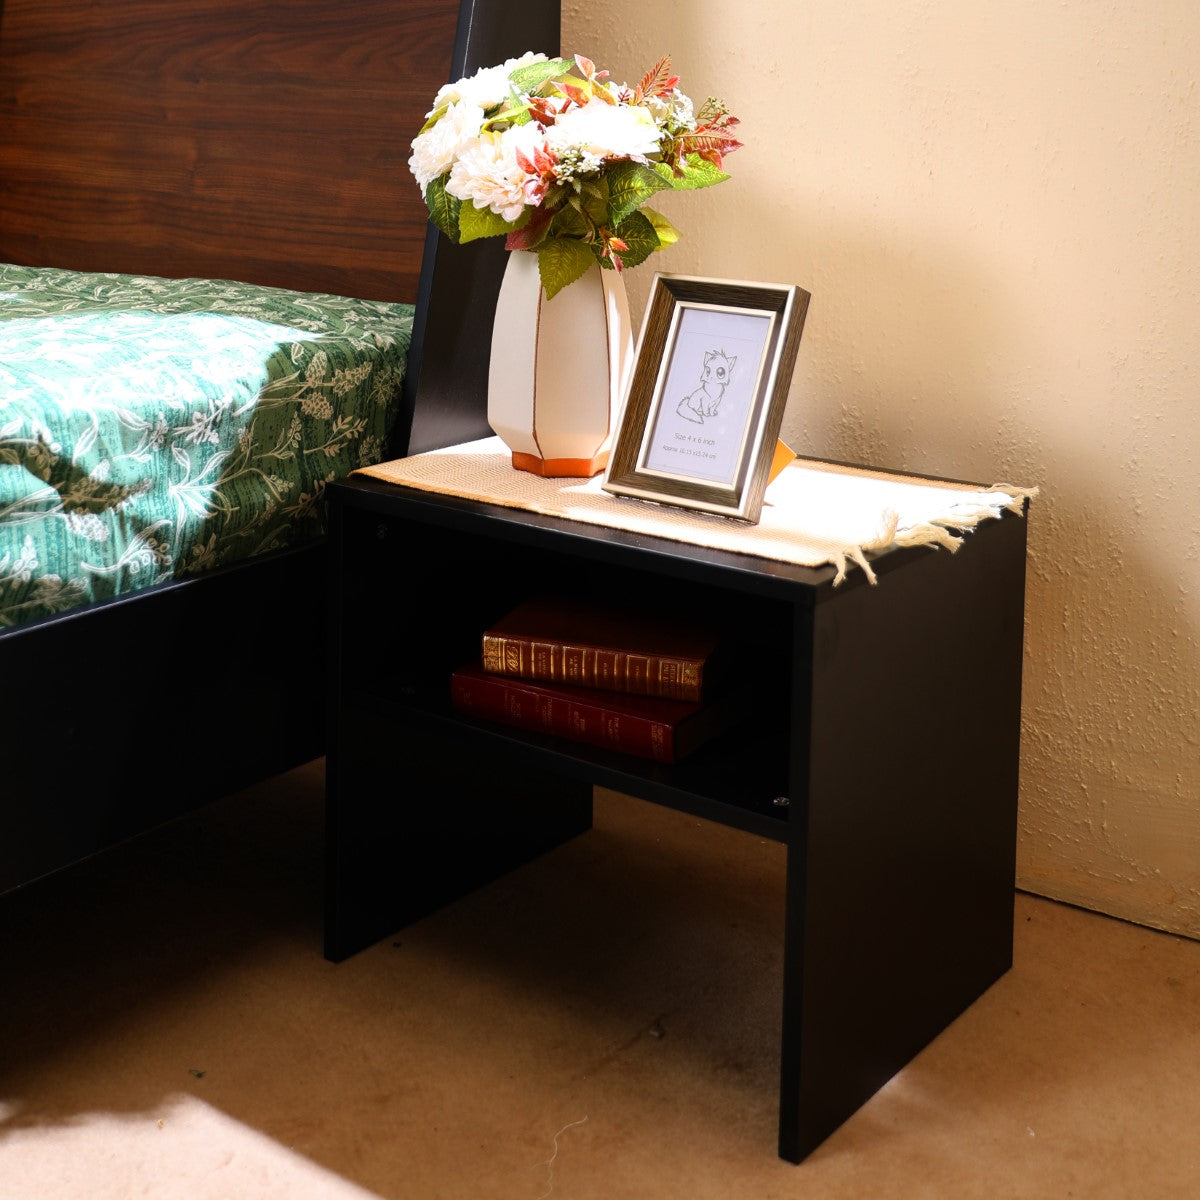 Savior King Size Bed With Two Side Tables